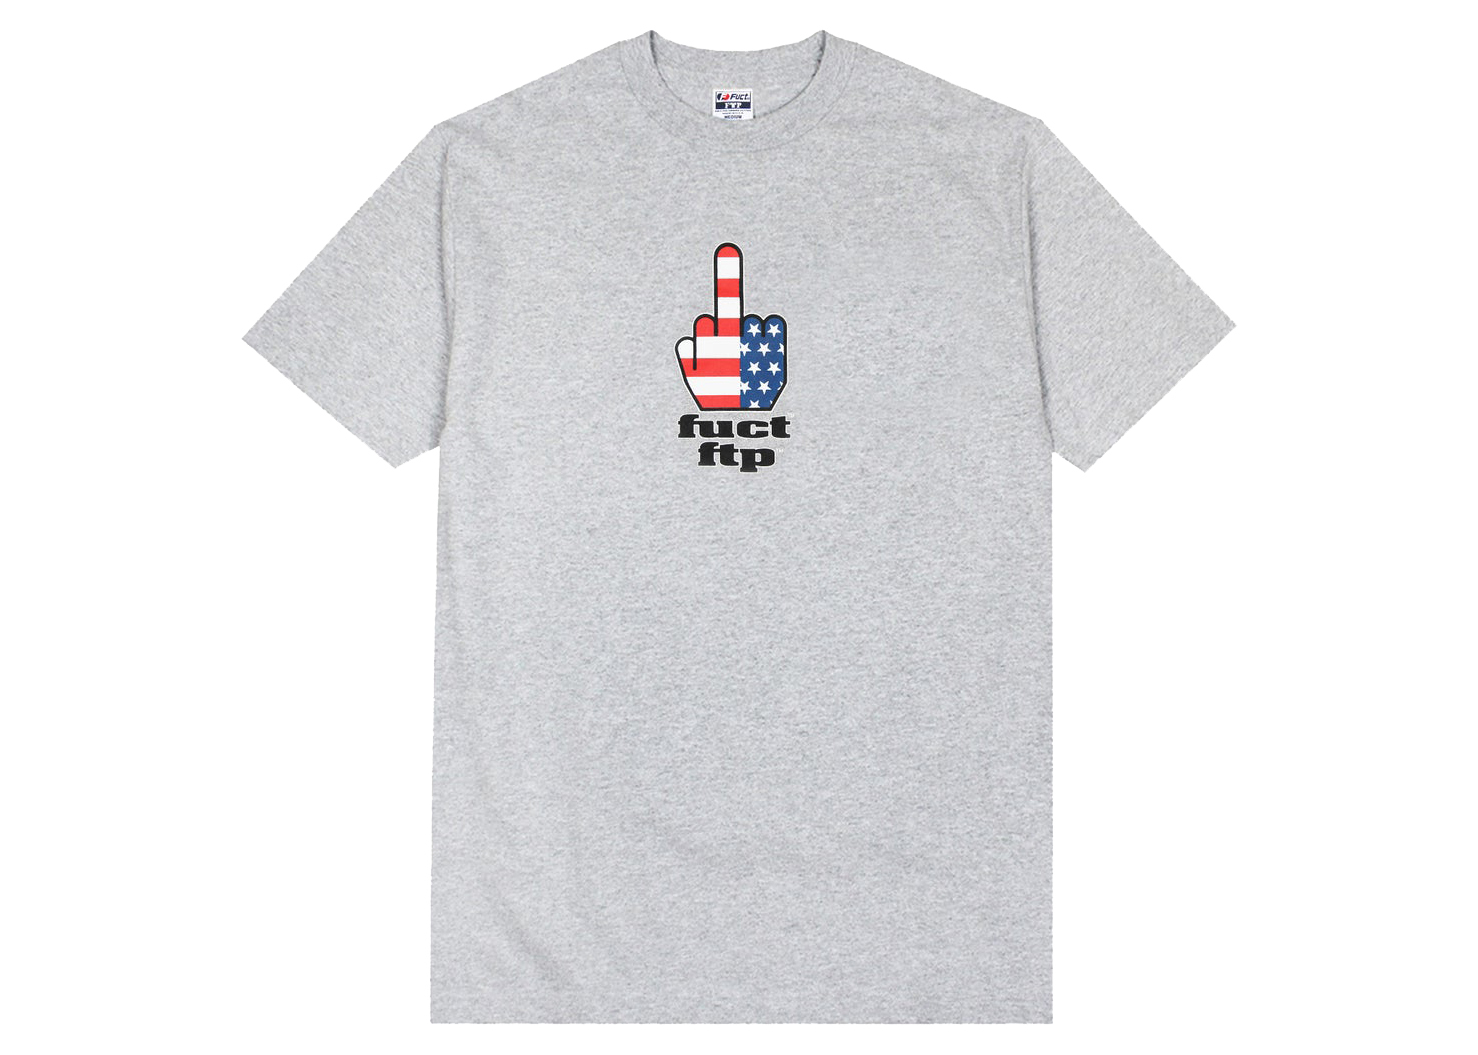 FTP x FUCT FTW Finger Tee Heather Grey Men's - SS22 - US